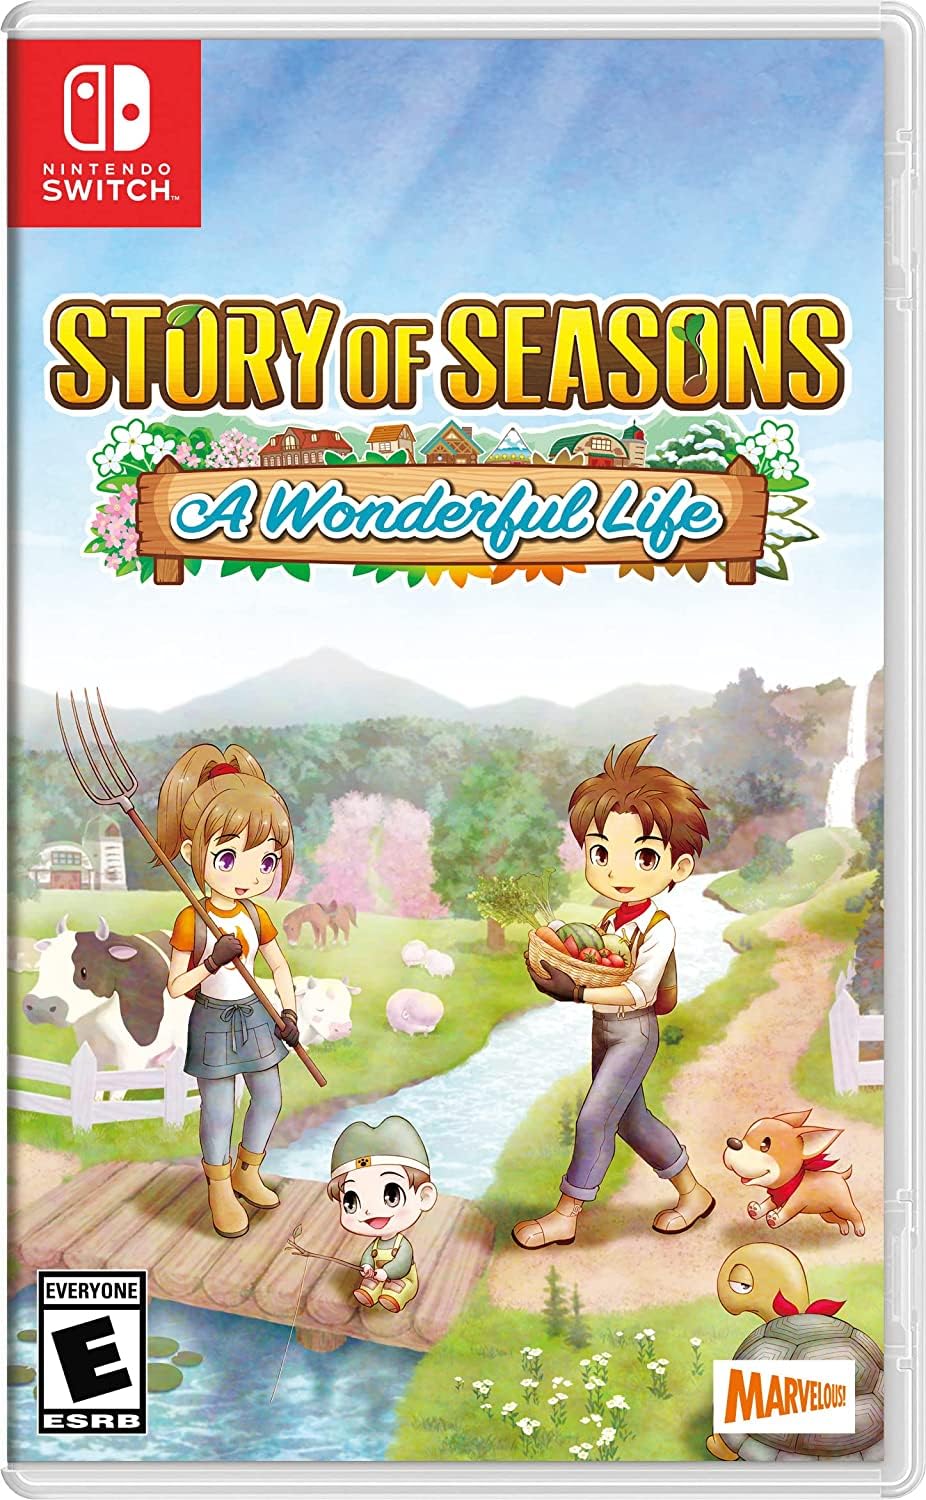 Story of Seasons: A Wonderful Life (Nintendo Switch) $28.79 + Free Shipping w/ Prime or on orders over $35